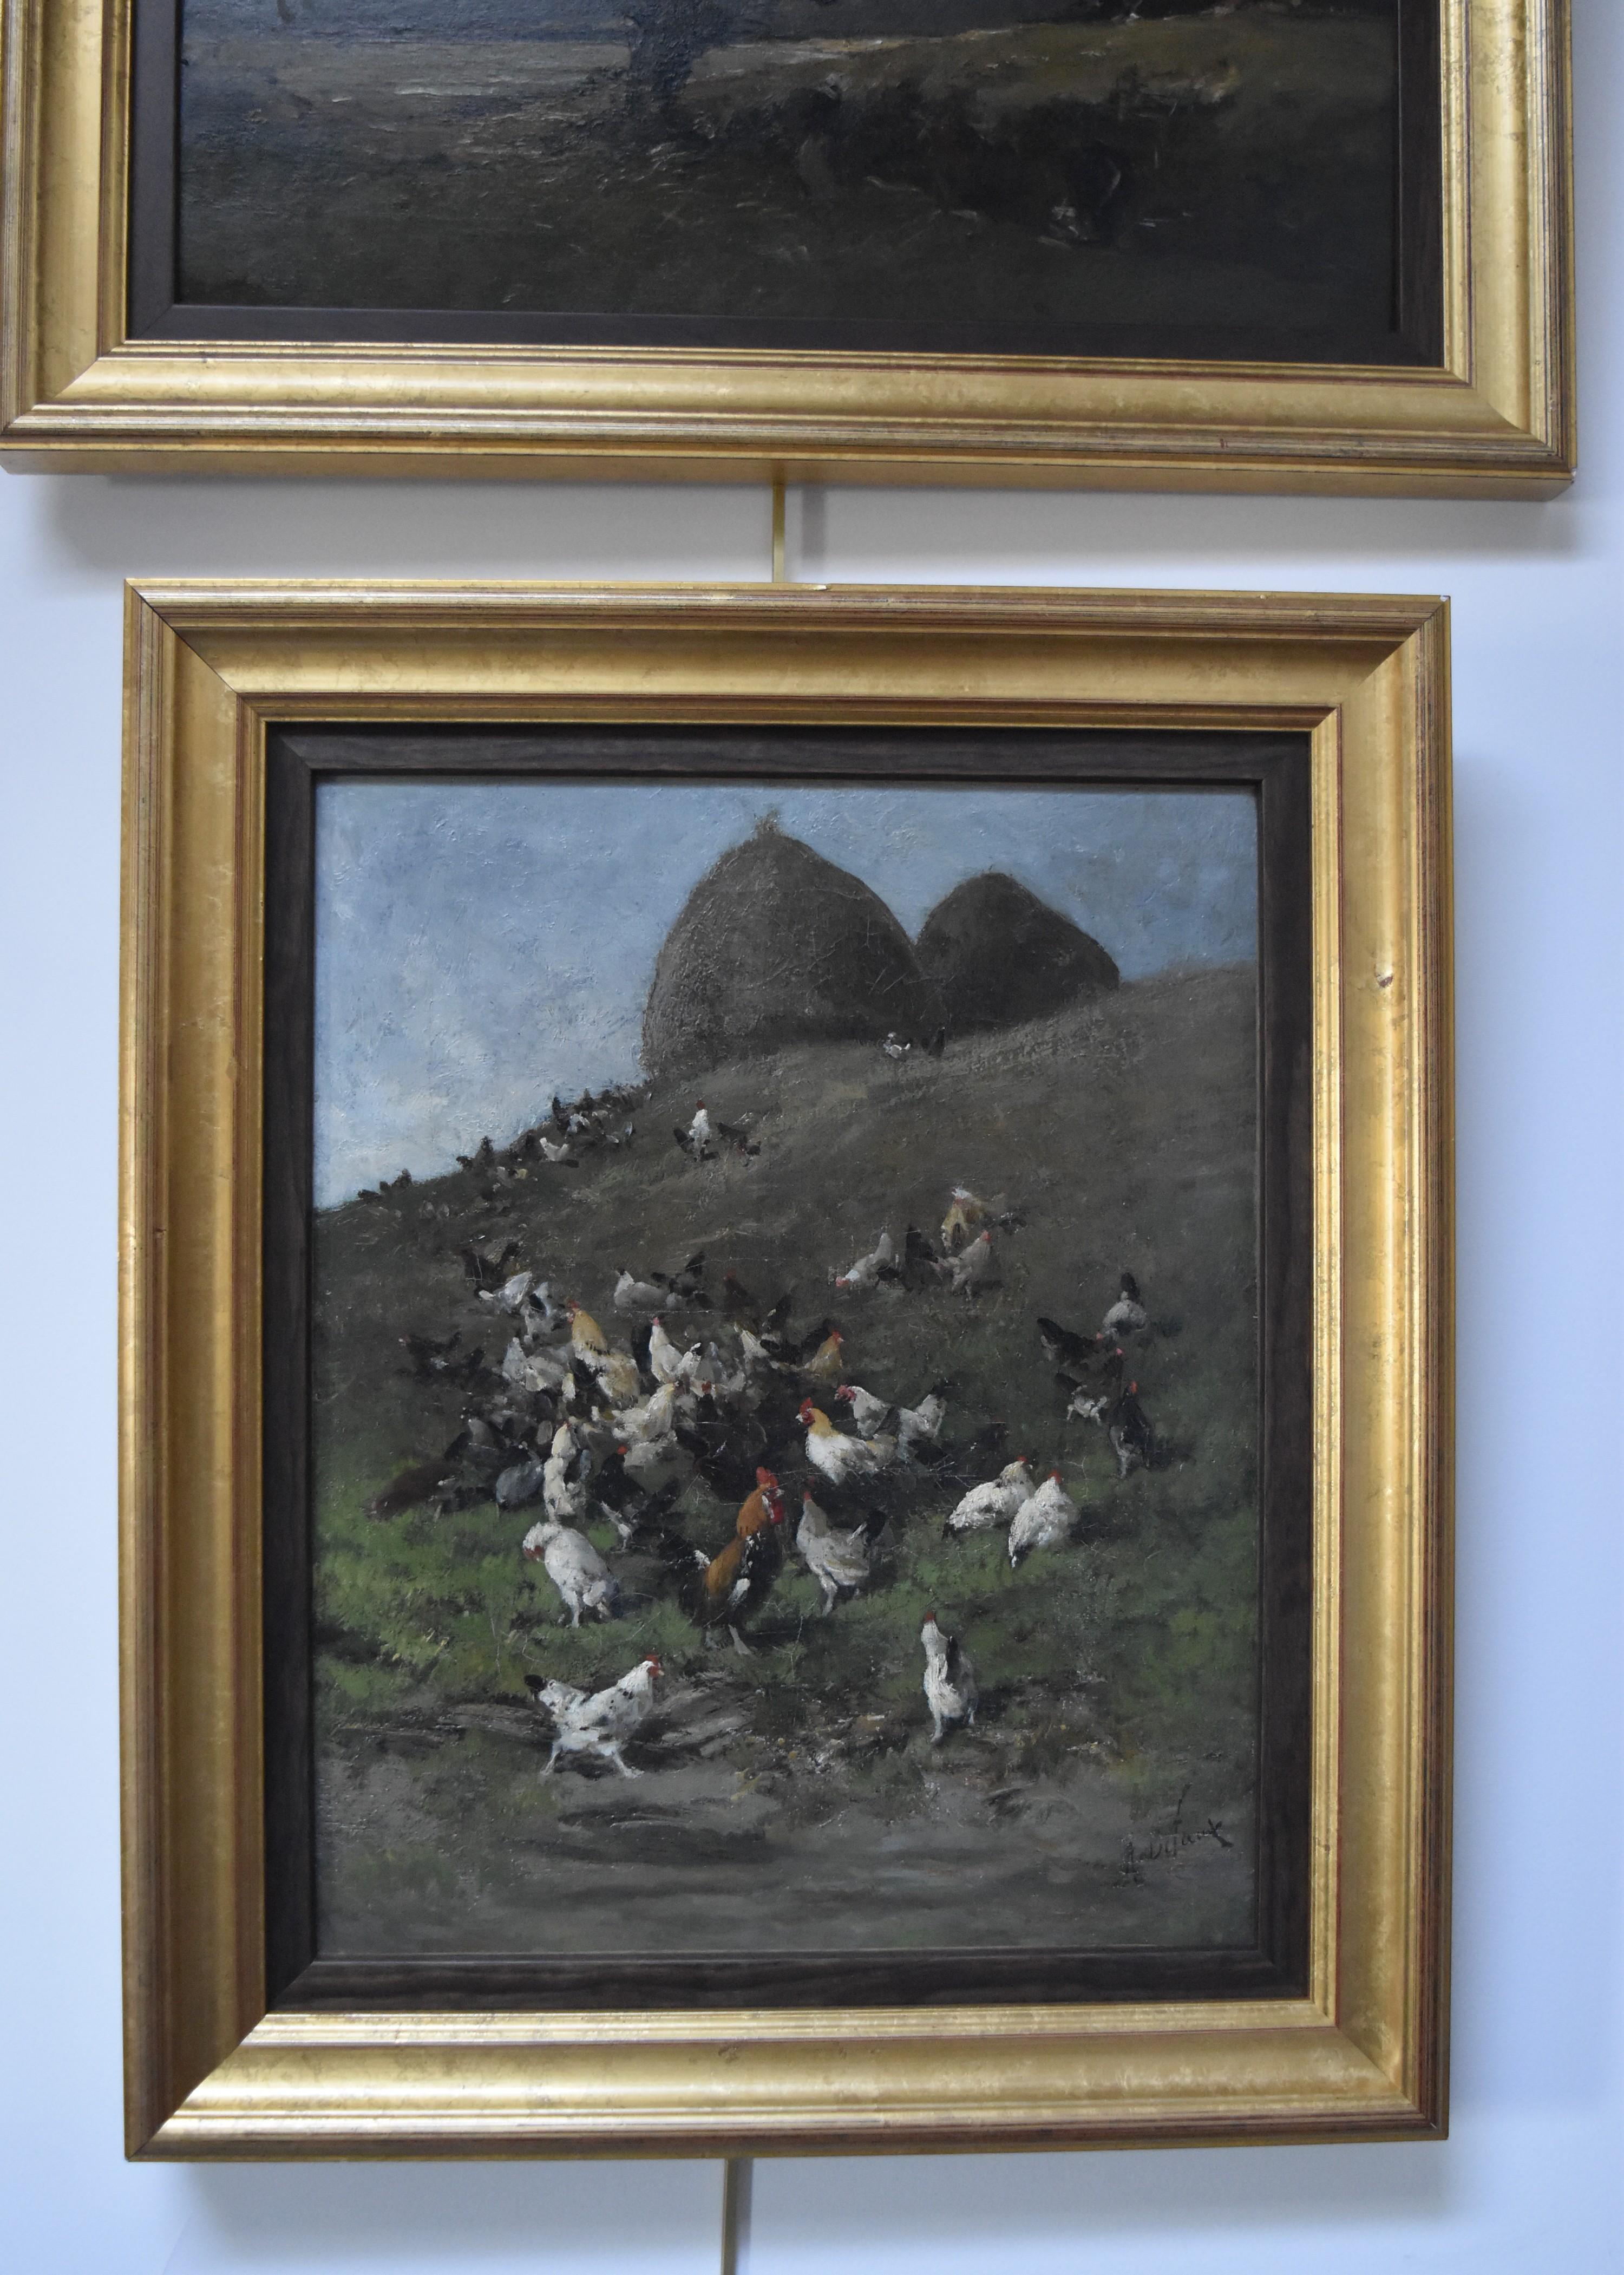 Alexandre Defaux (1826-1900) Hens and roosters in a field, signed, oil on canvas 5